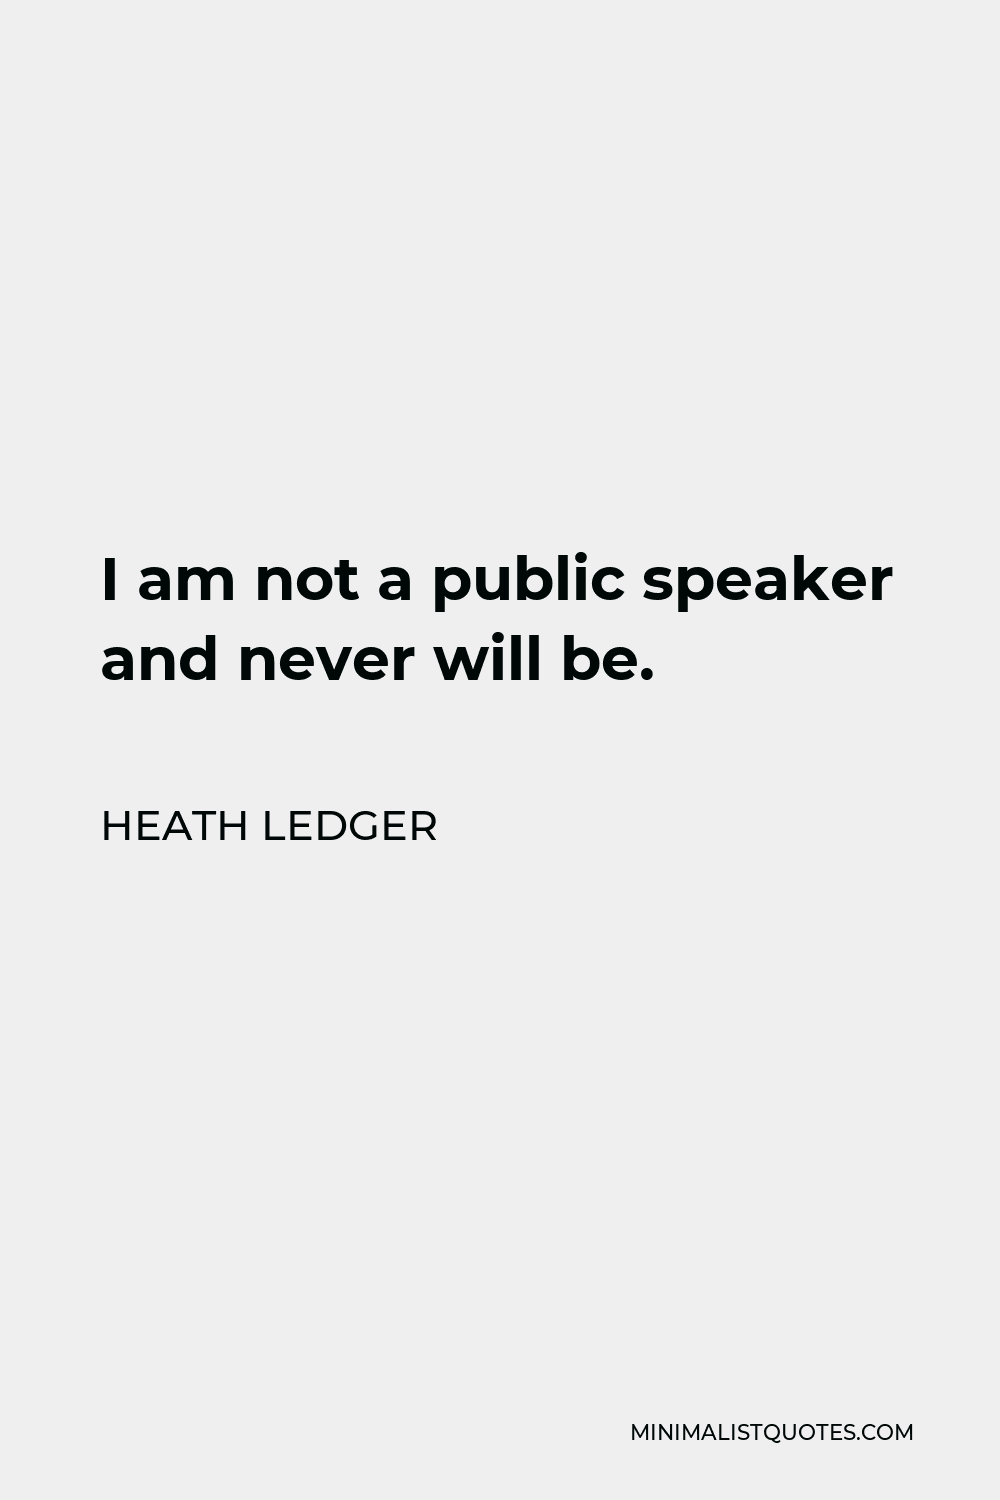 Heath Ledger Quote - I am not a public speaker and never will be.